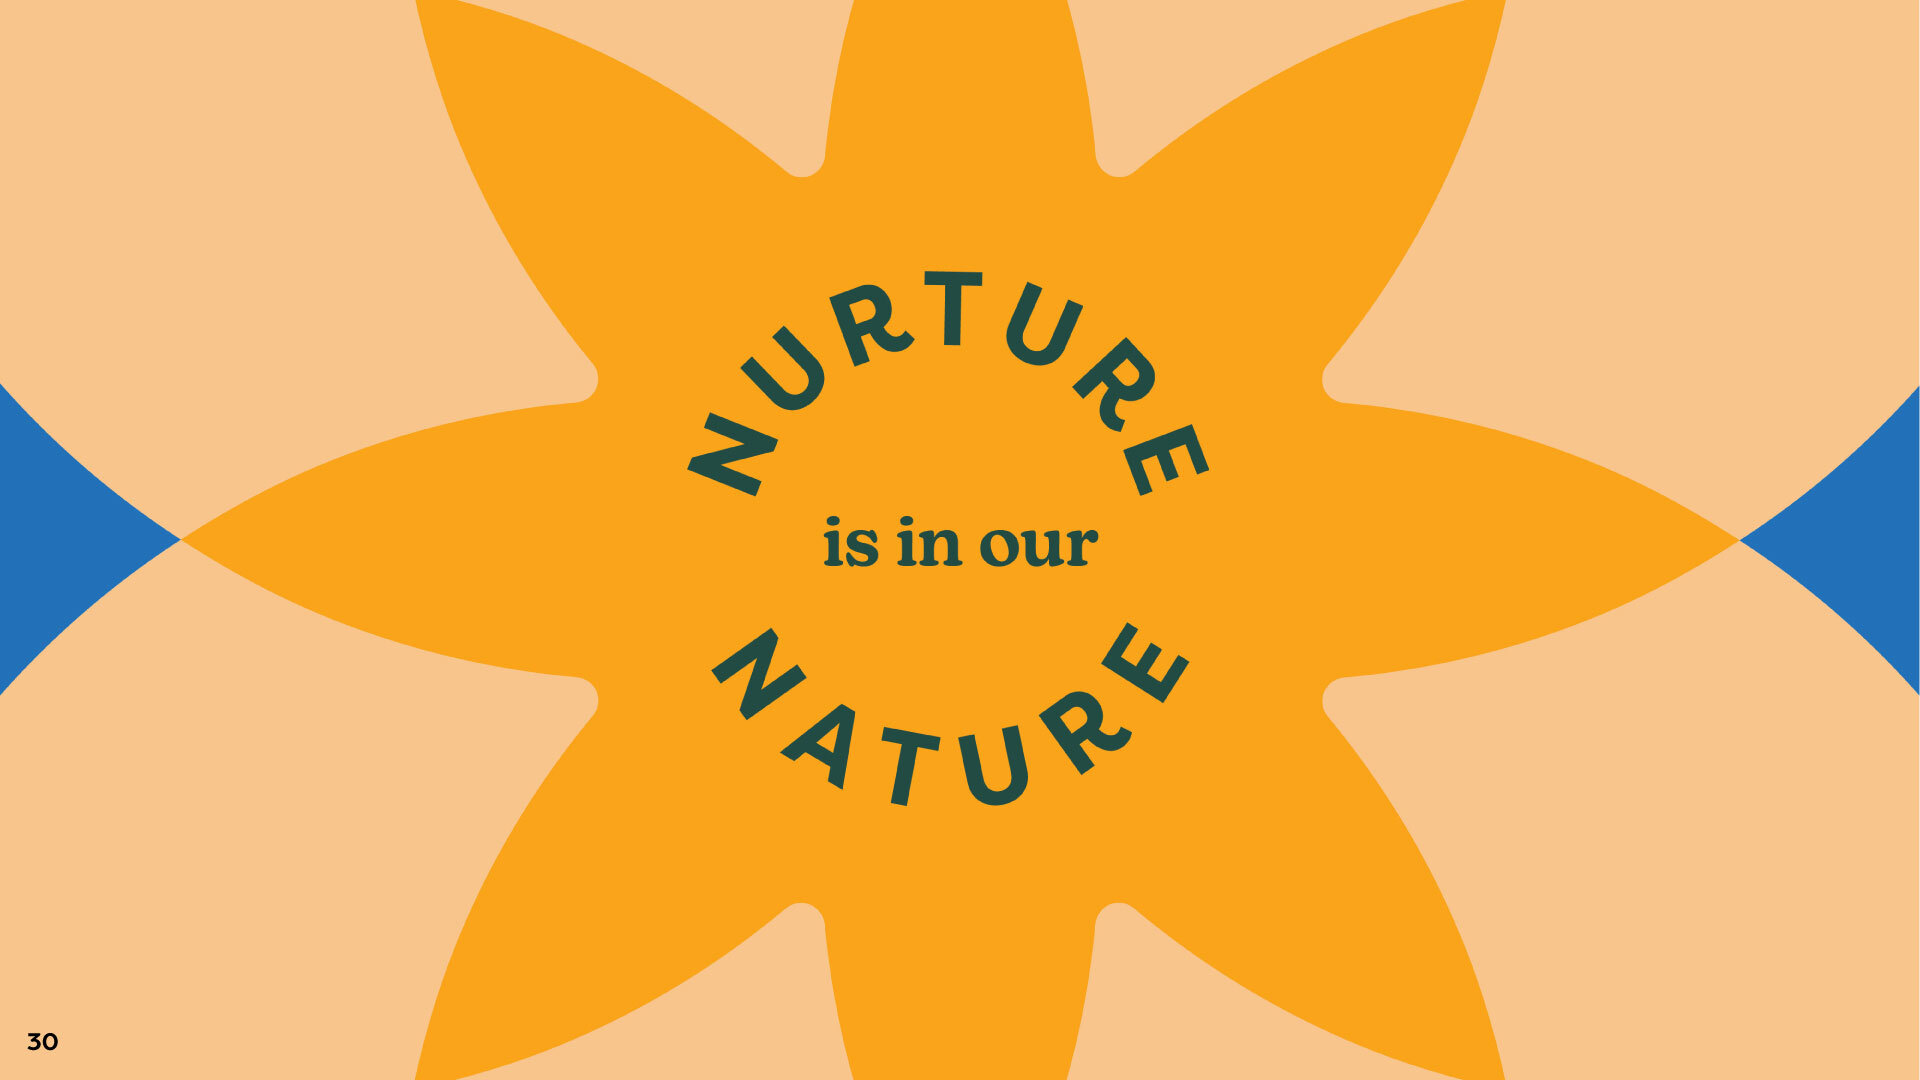 Hopebridge brand design by Tilted Chair reading "Nurture is in our Nature"